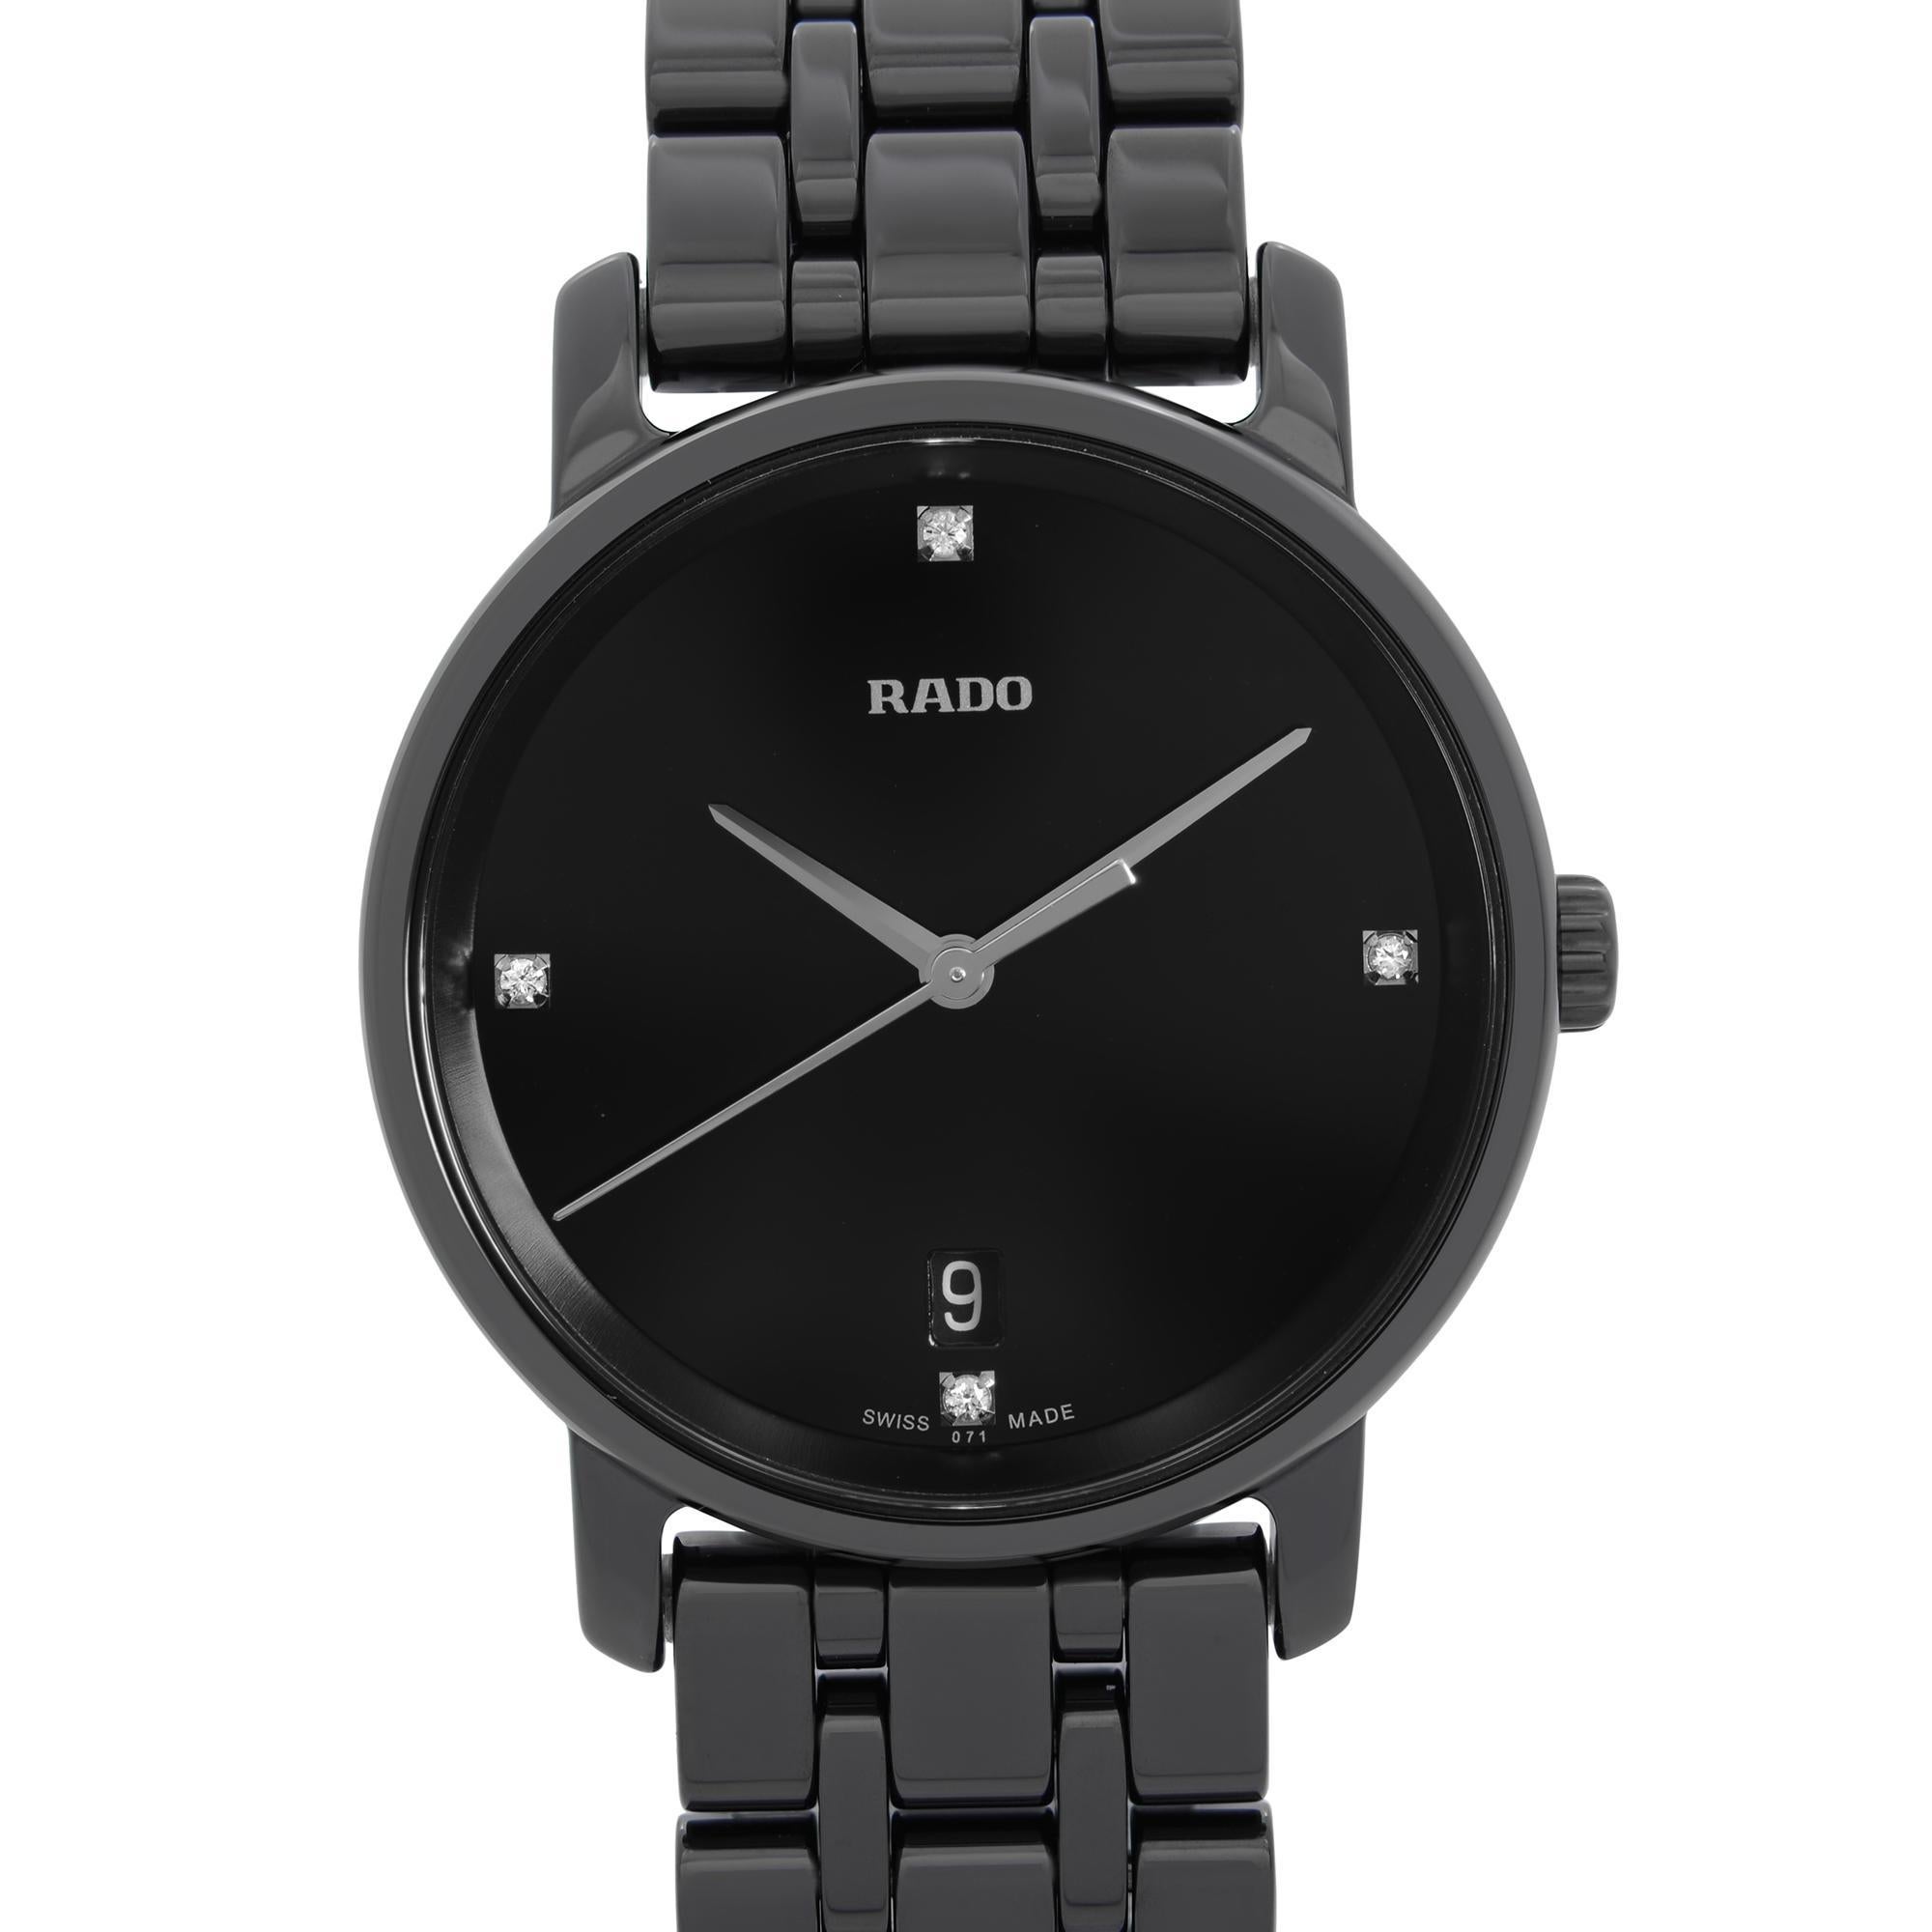 Unworn Rado DiaMaster Quartz Watch R14063717. This Ladies Timepiece is Powered by a Quartz (Battery) Movement and Features: Black Ceramic Case and Bracelet, Fixed Black Ceramic Bezel, Black Dial with Silver-Tone Hands And Diamond Hour Markers (0.026